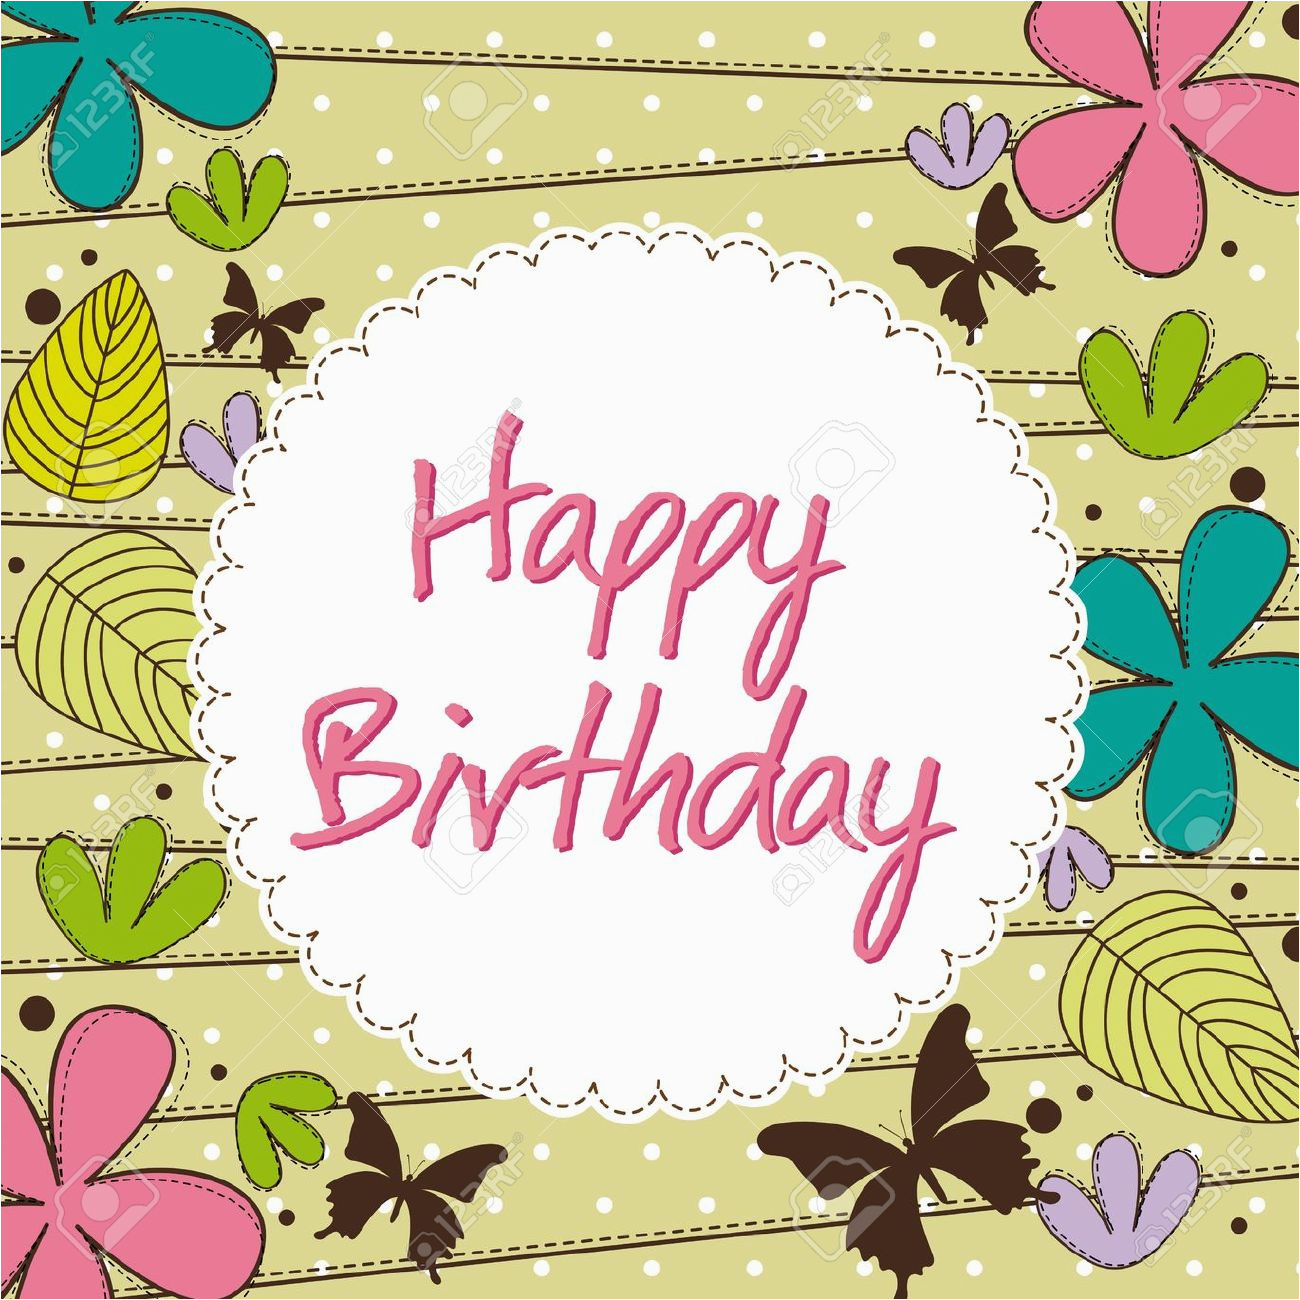 free birthday bouquet cliparts download free clip art